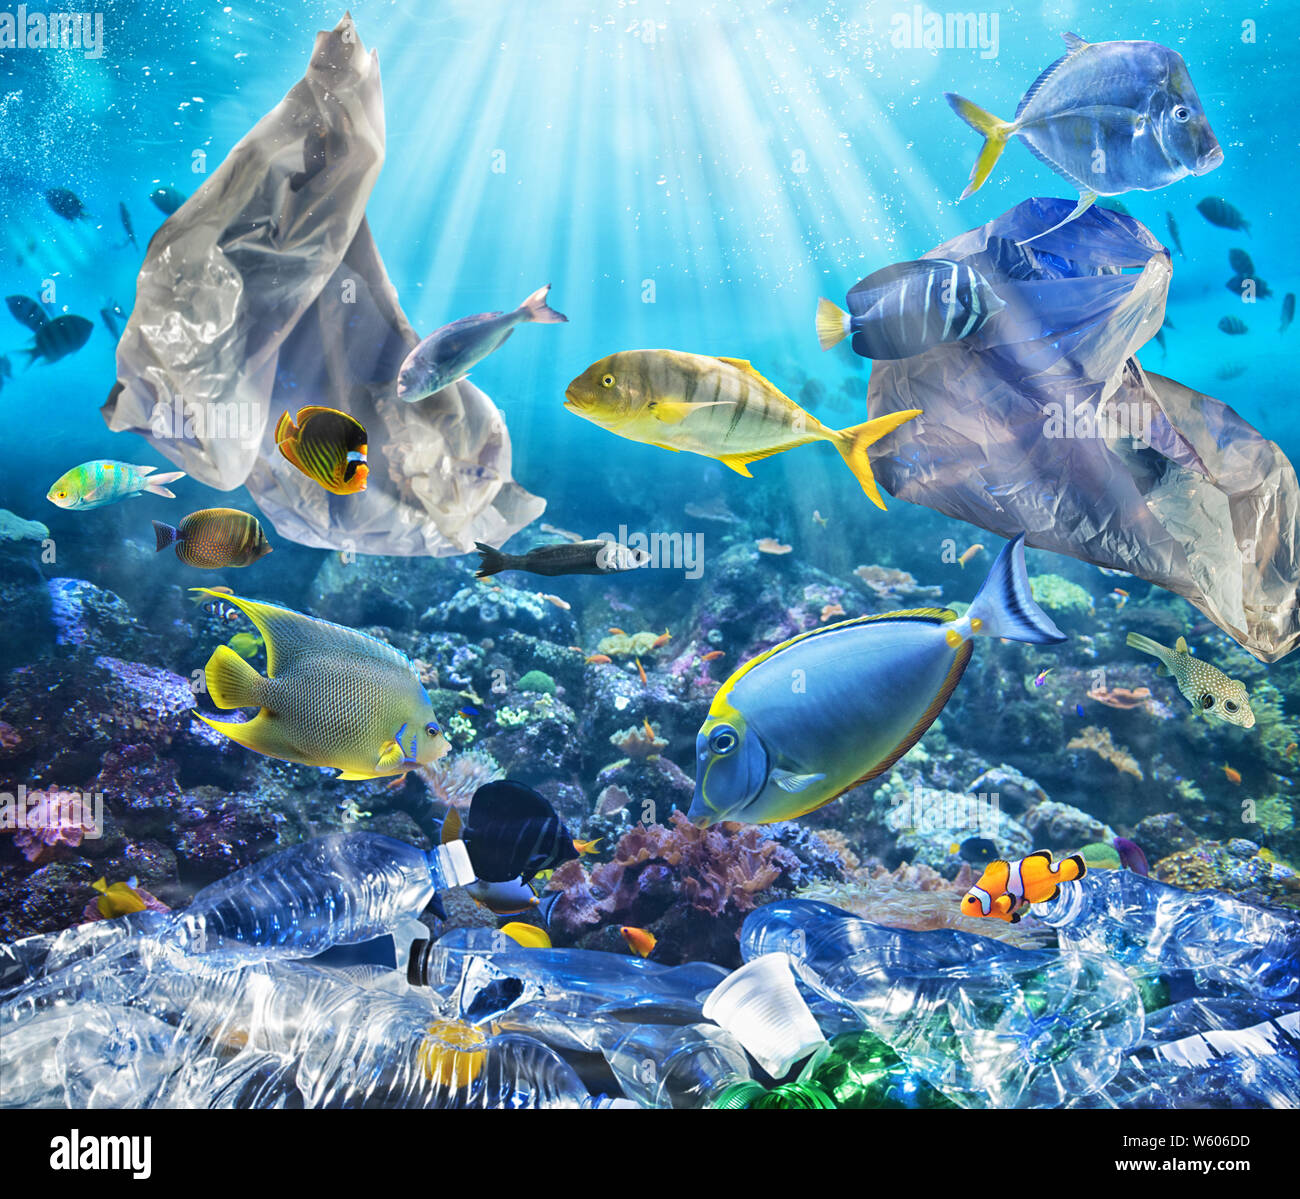 Fishes swims with floating bags. Problem of plastic pollution under the sea concept. Stock Photo